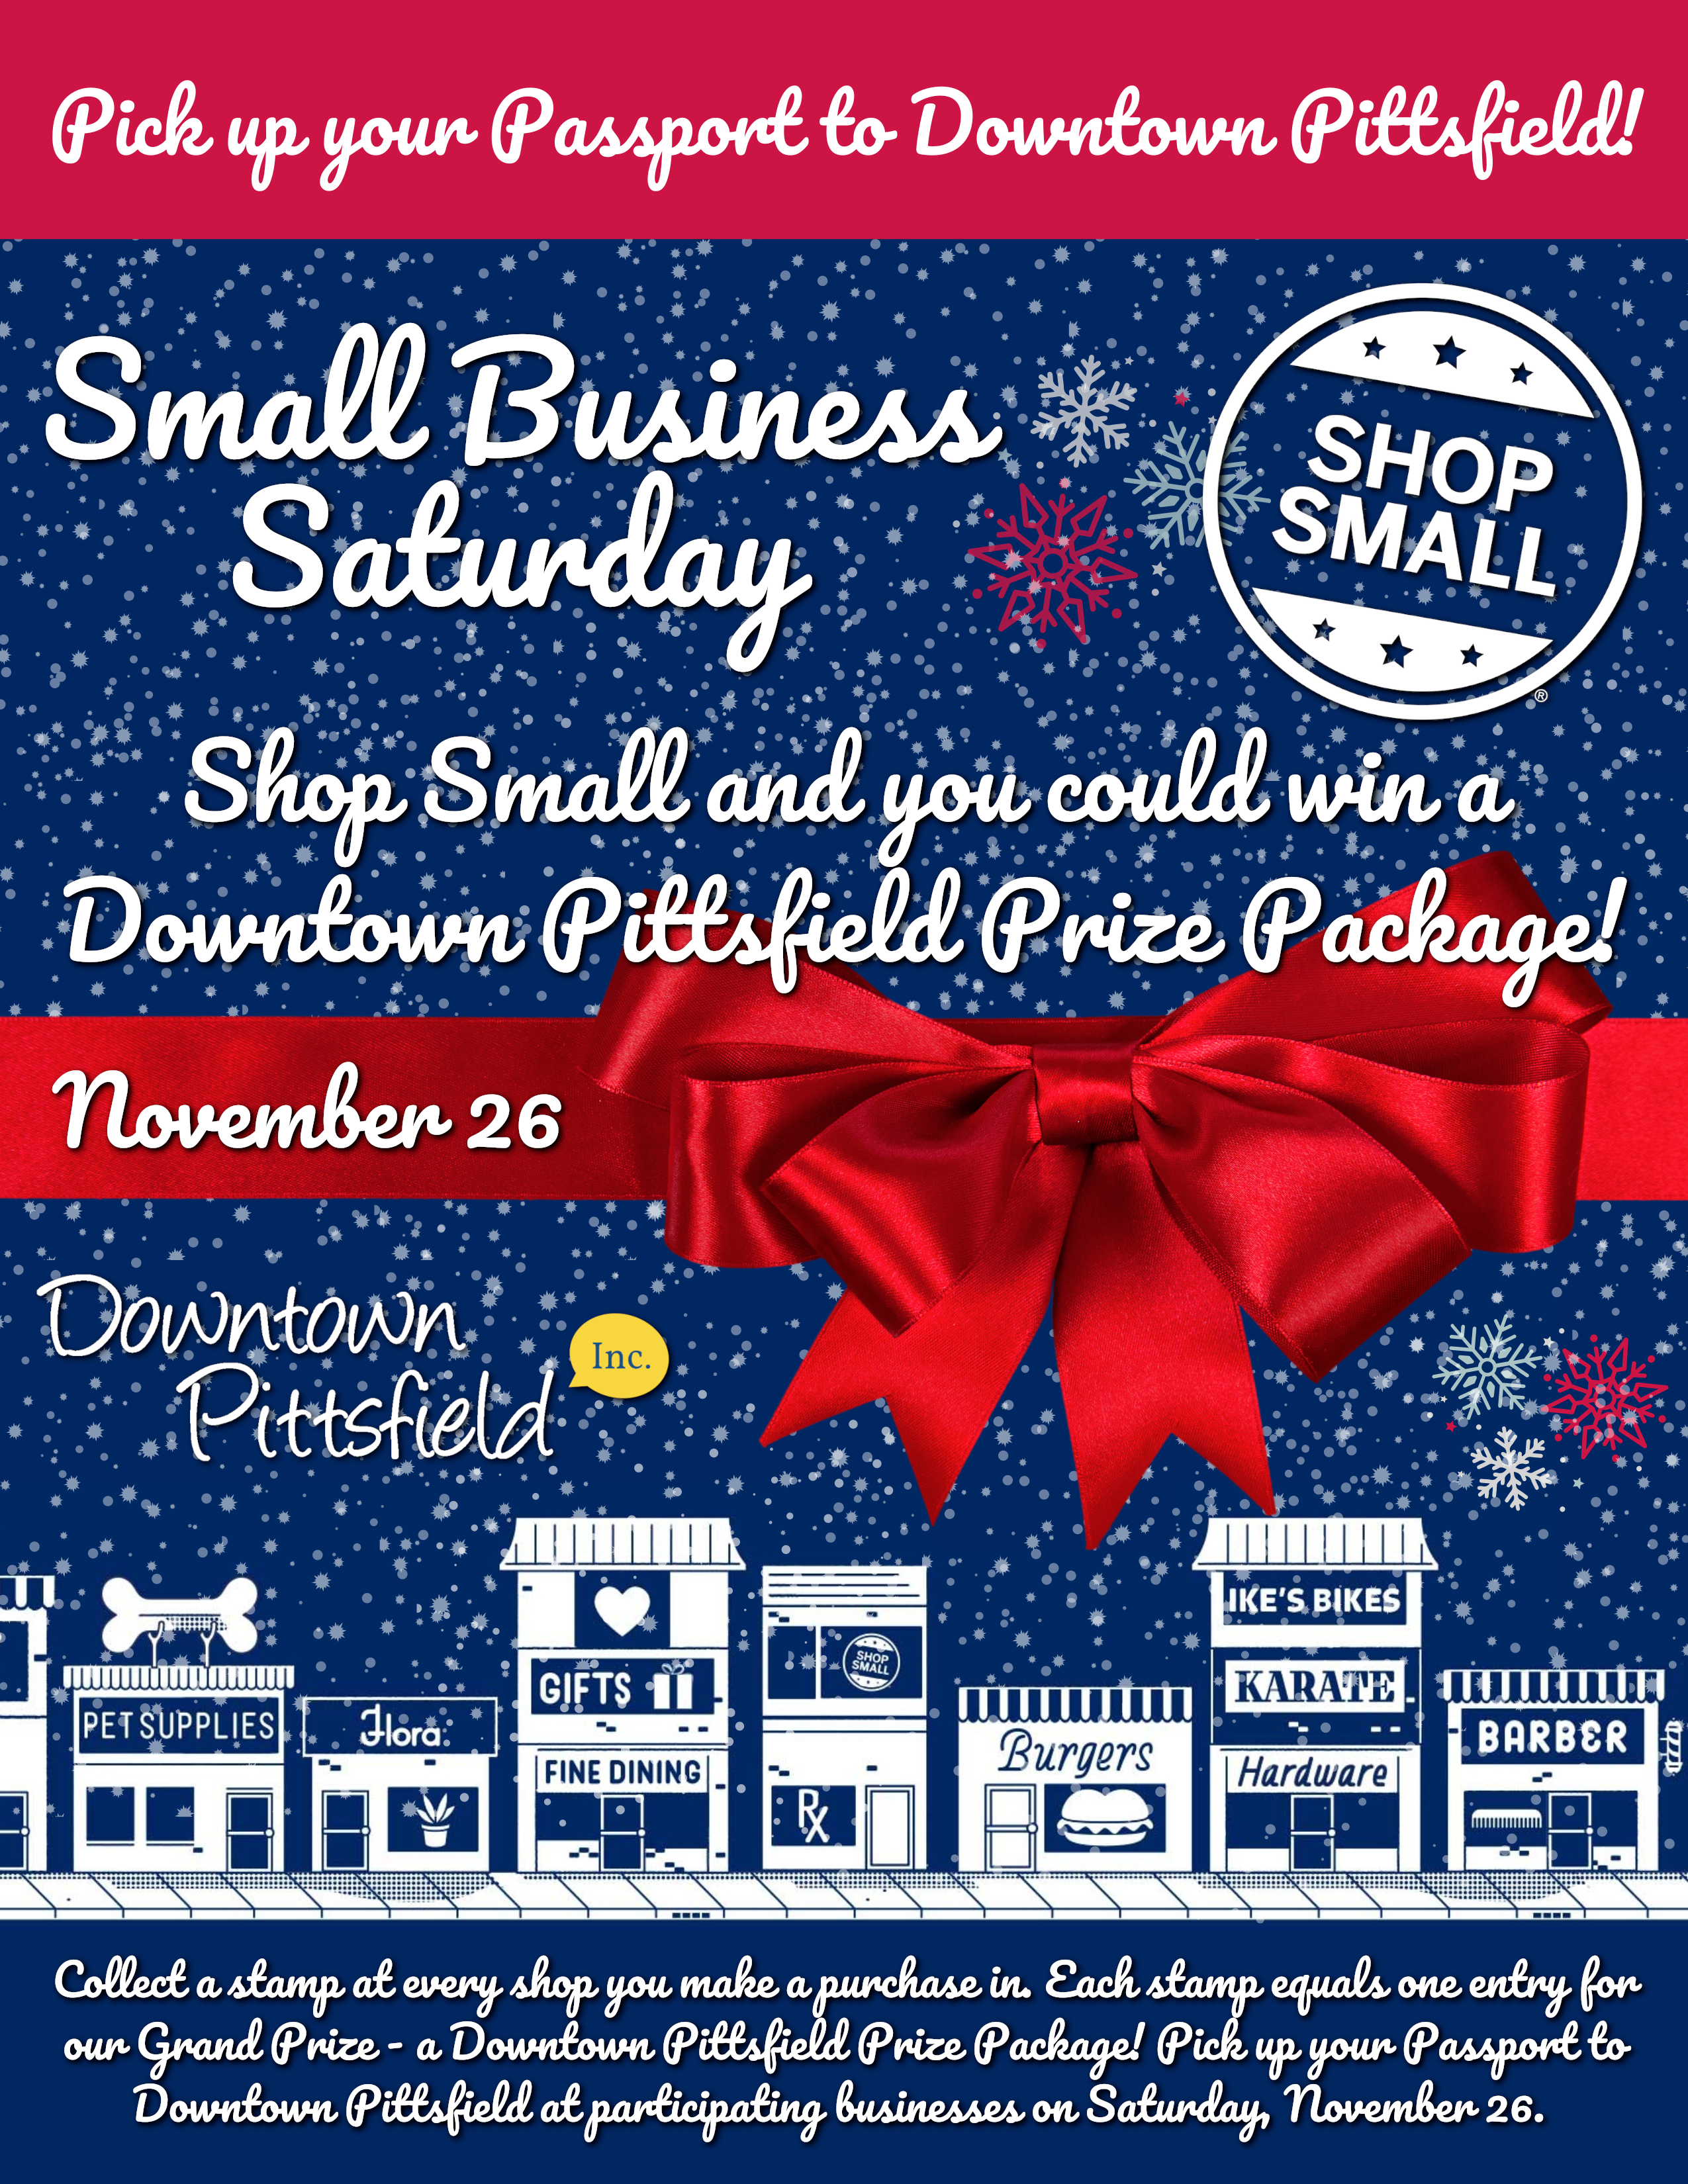 Passport to Downtown Pittsfield during Small Business Saturday